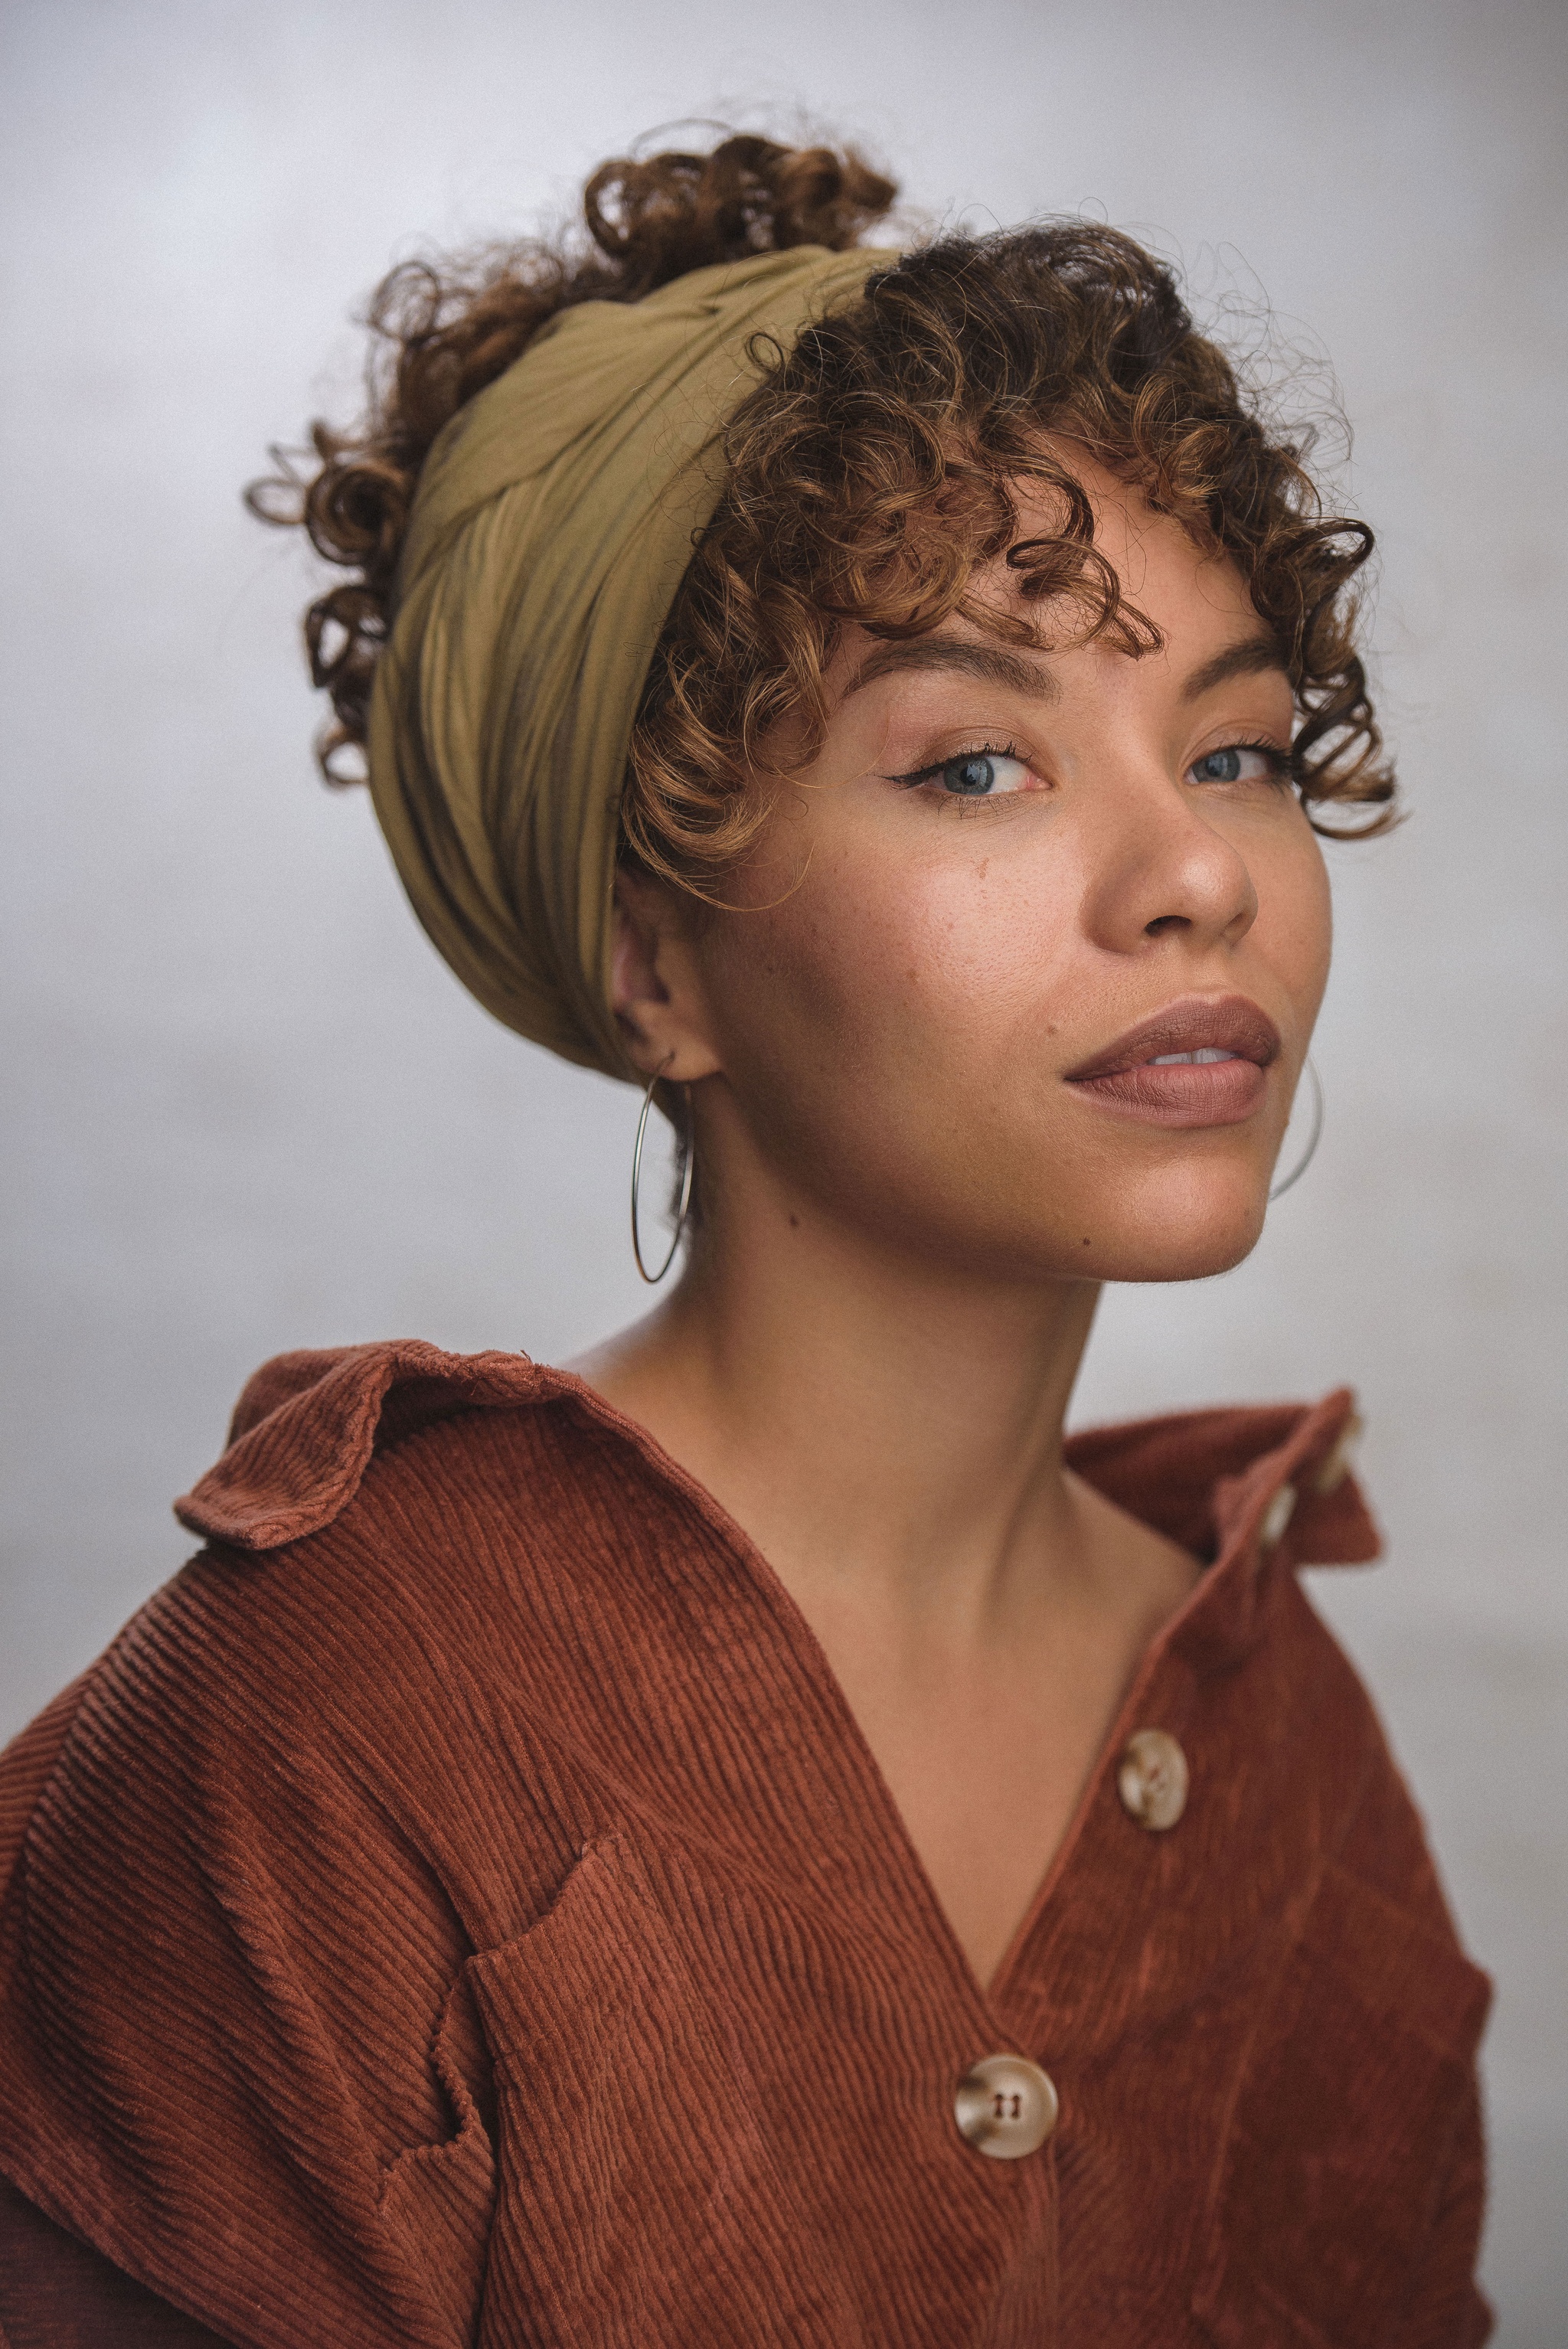 Saffron Coomber, a Black woman with curly brown hair pulled up in a wrap behind her head, poses against a neutral backdrop in three quarters view, turning her eyes to look directly at us. She wears a brown collared corduroy shirt.